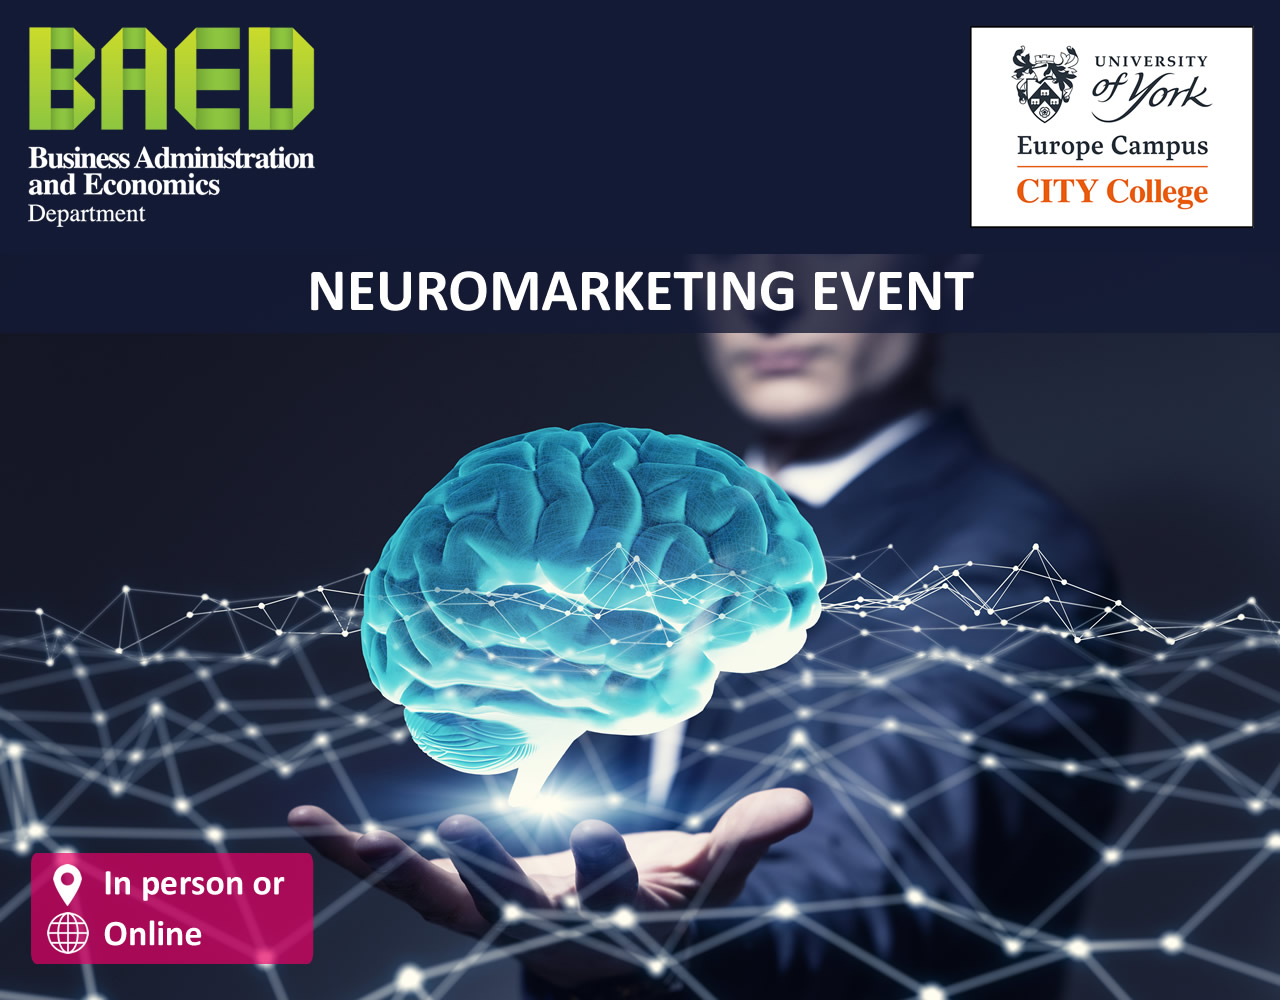 Brains, Business and Behaviour: How Neuroscience Changes Marketing and Management